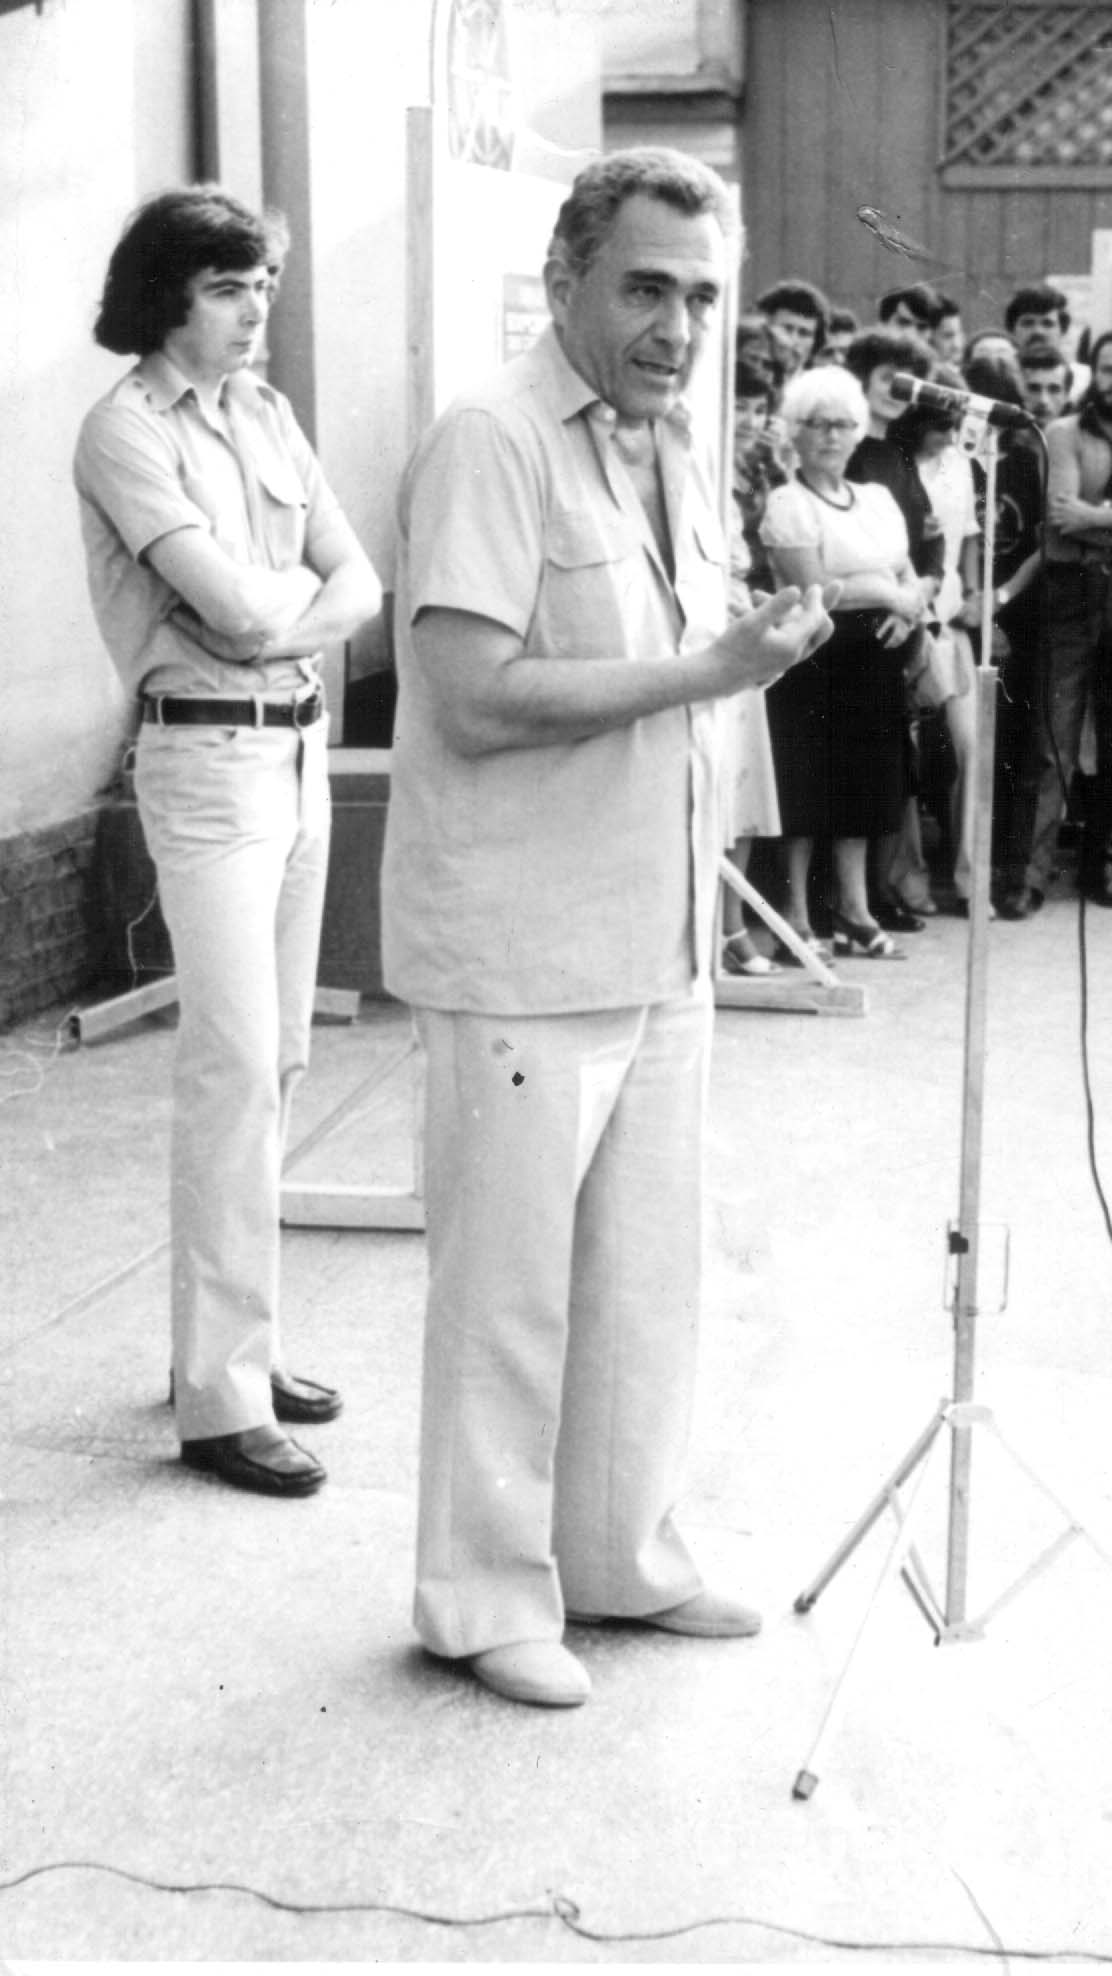 1982, Timisoara, the Tenth national SF convention. Sergiu Levin (right) saying the introductory word for Sergiu Nicola's Art exhibition